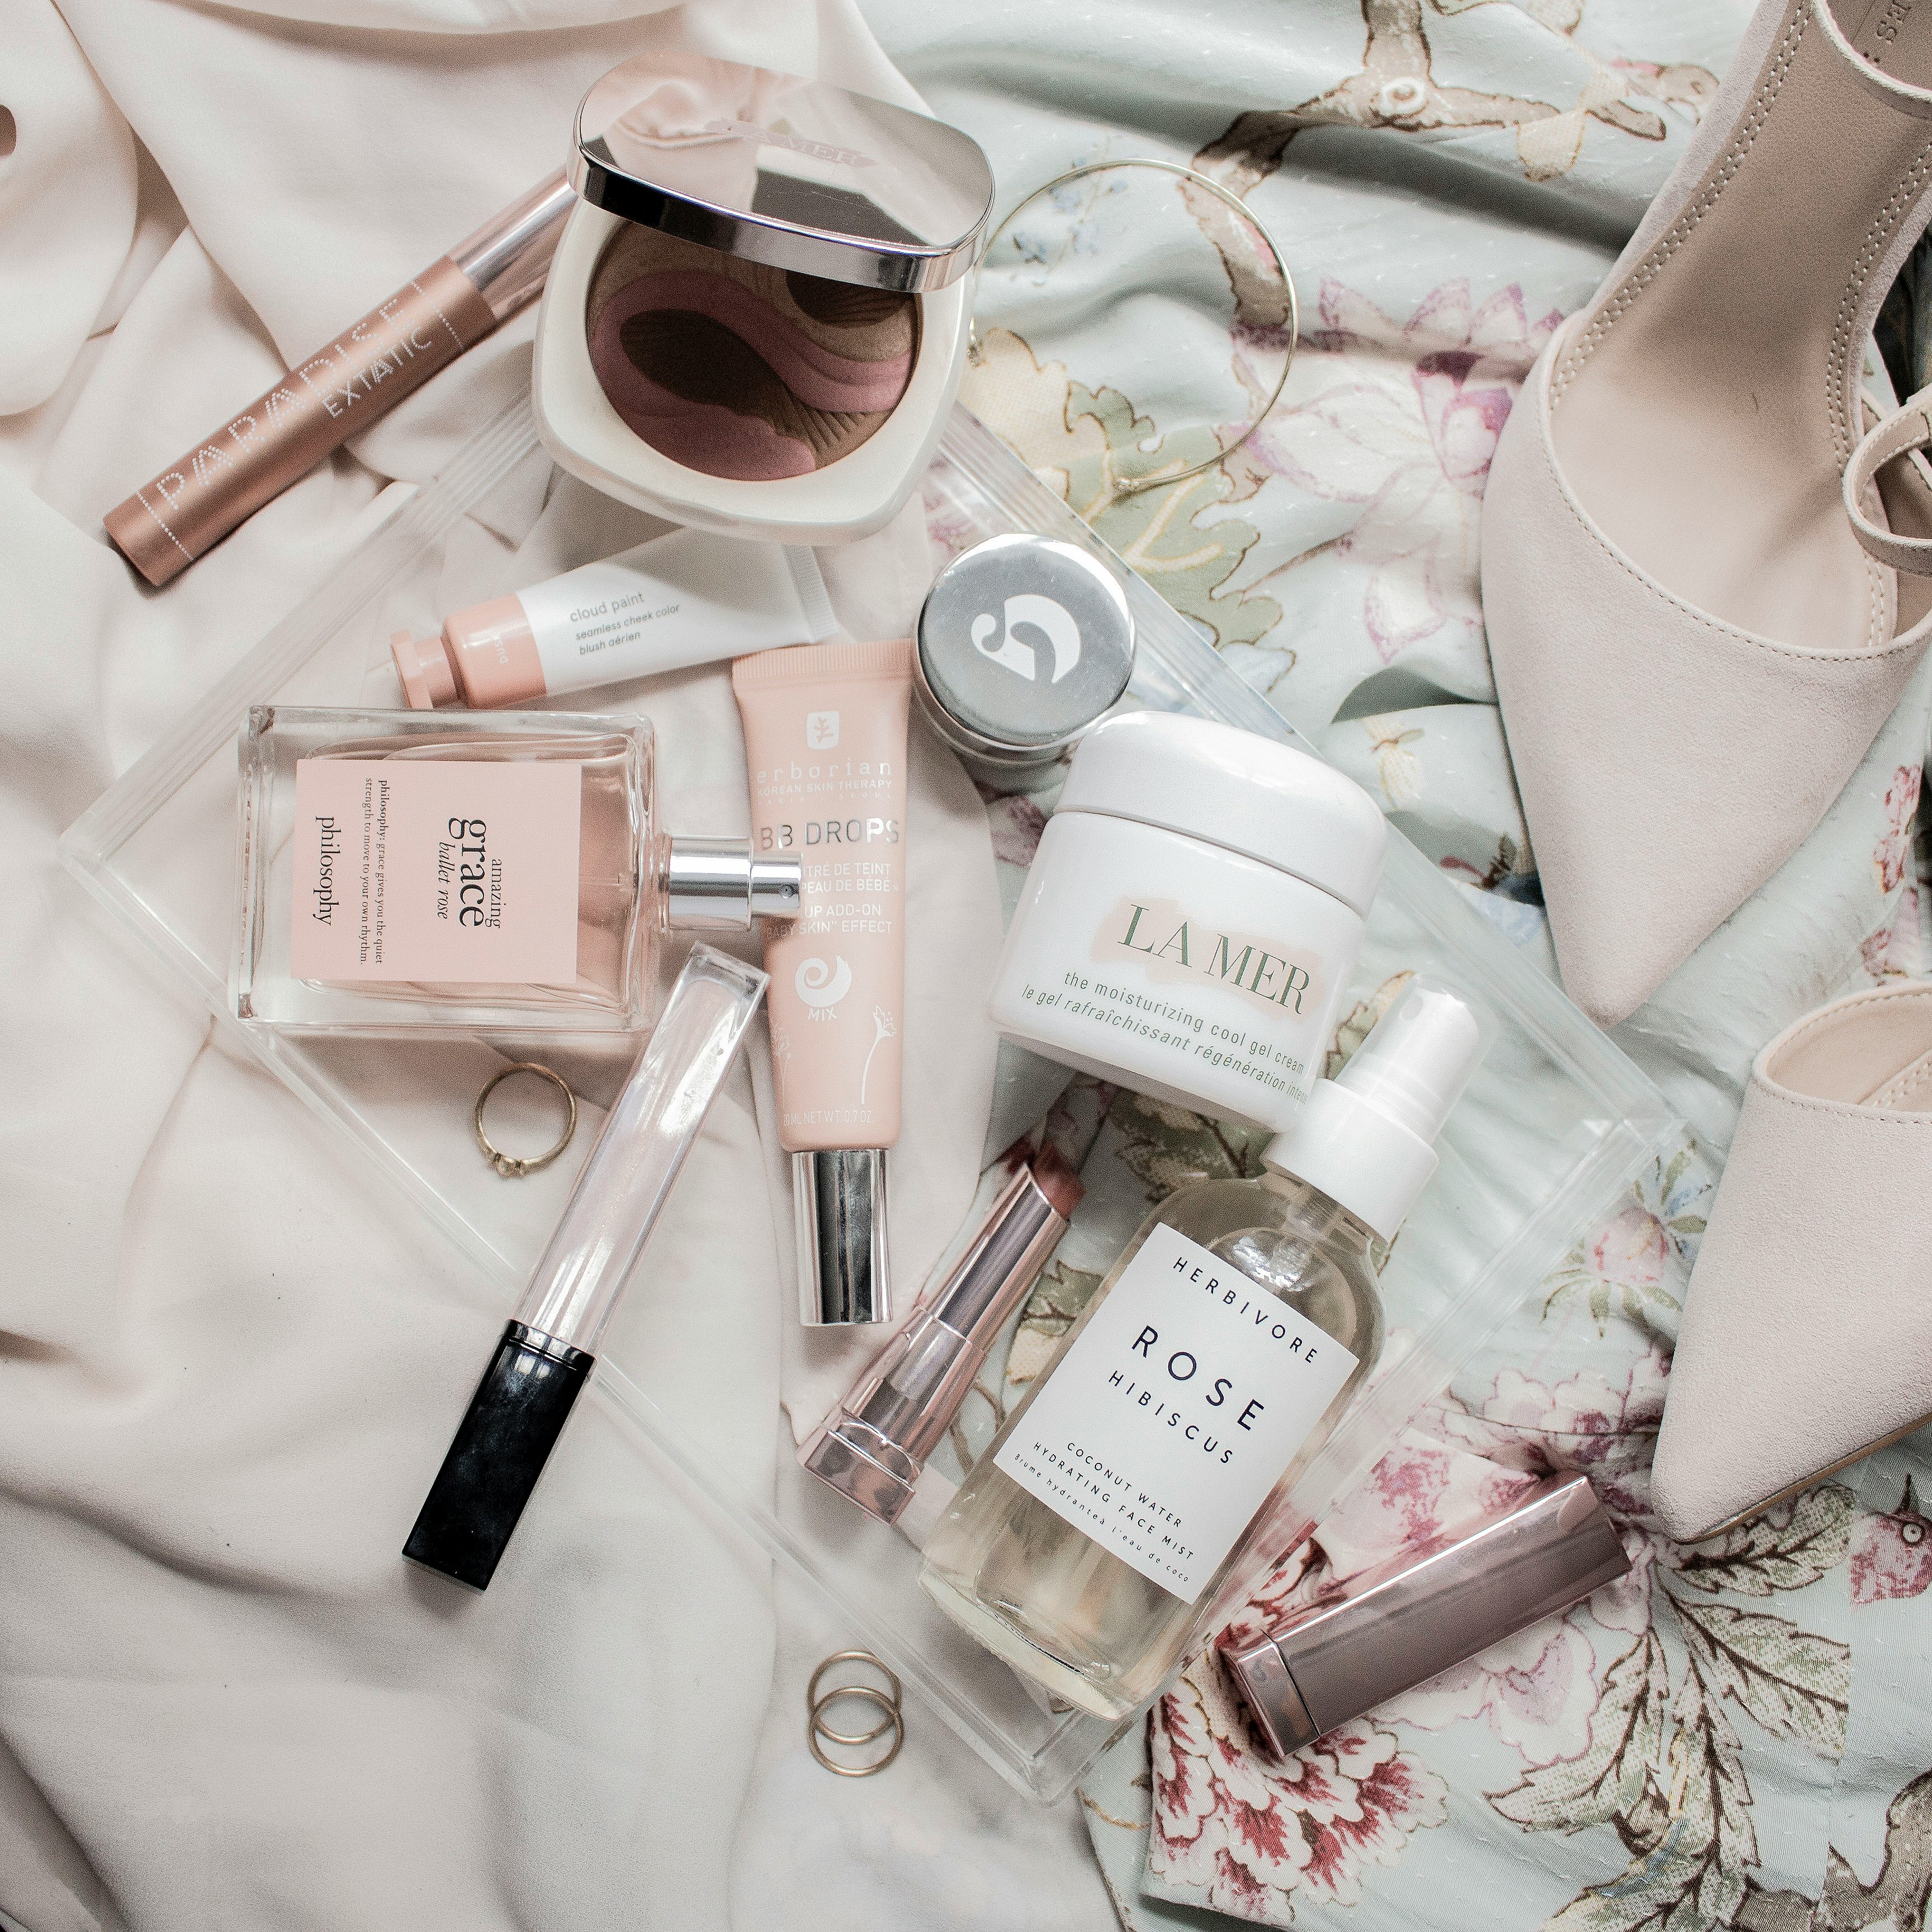 Makeup flatlay of high-end beauty products